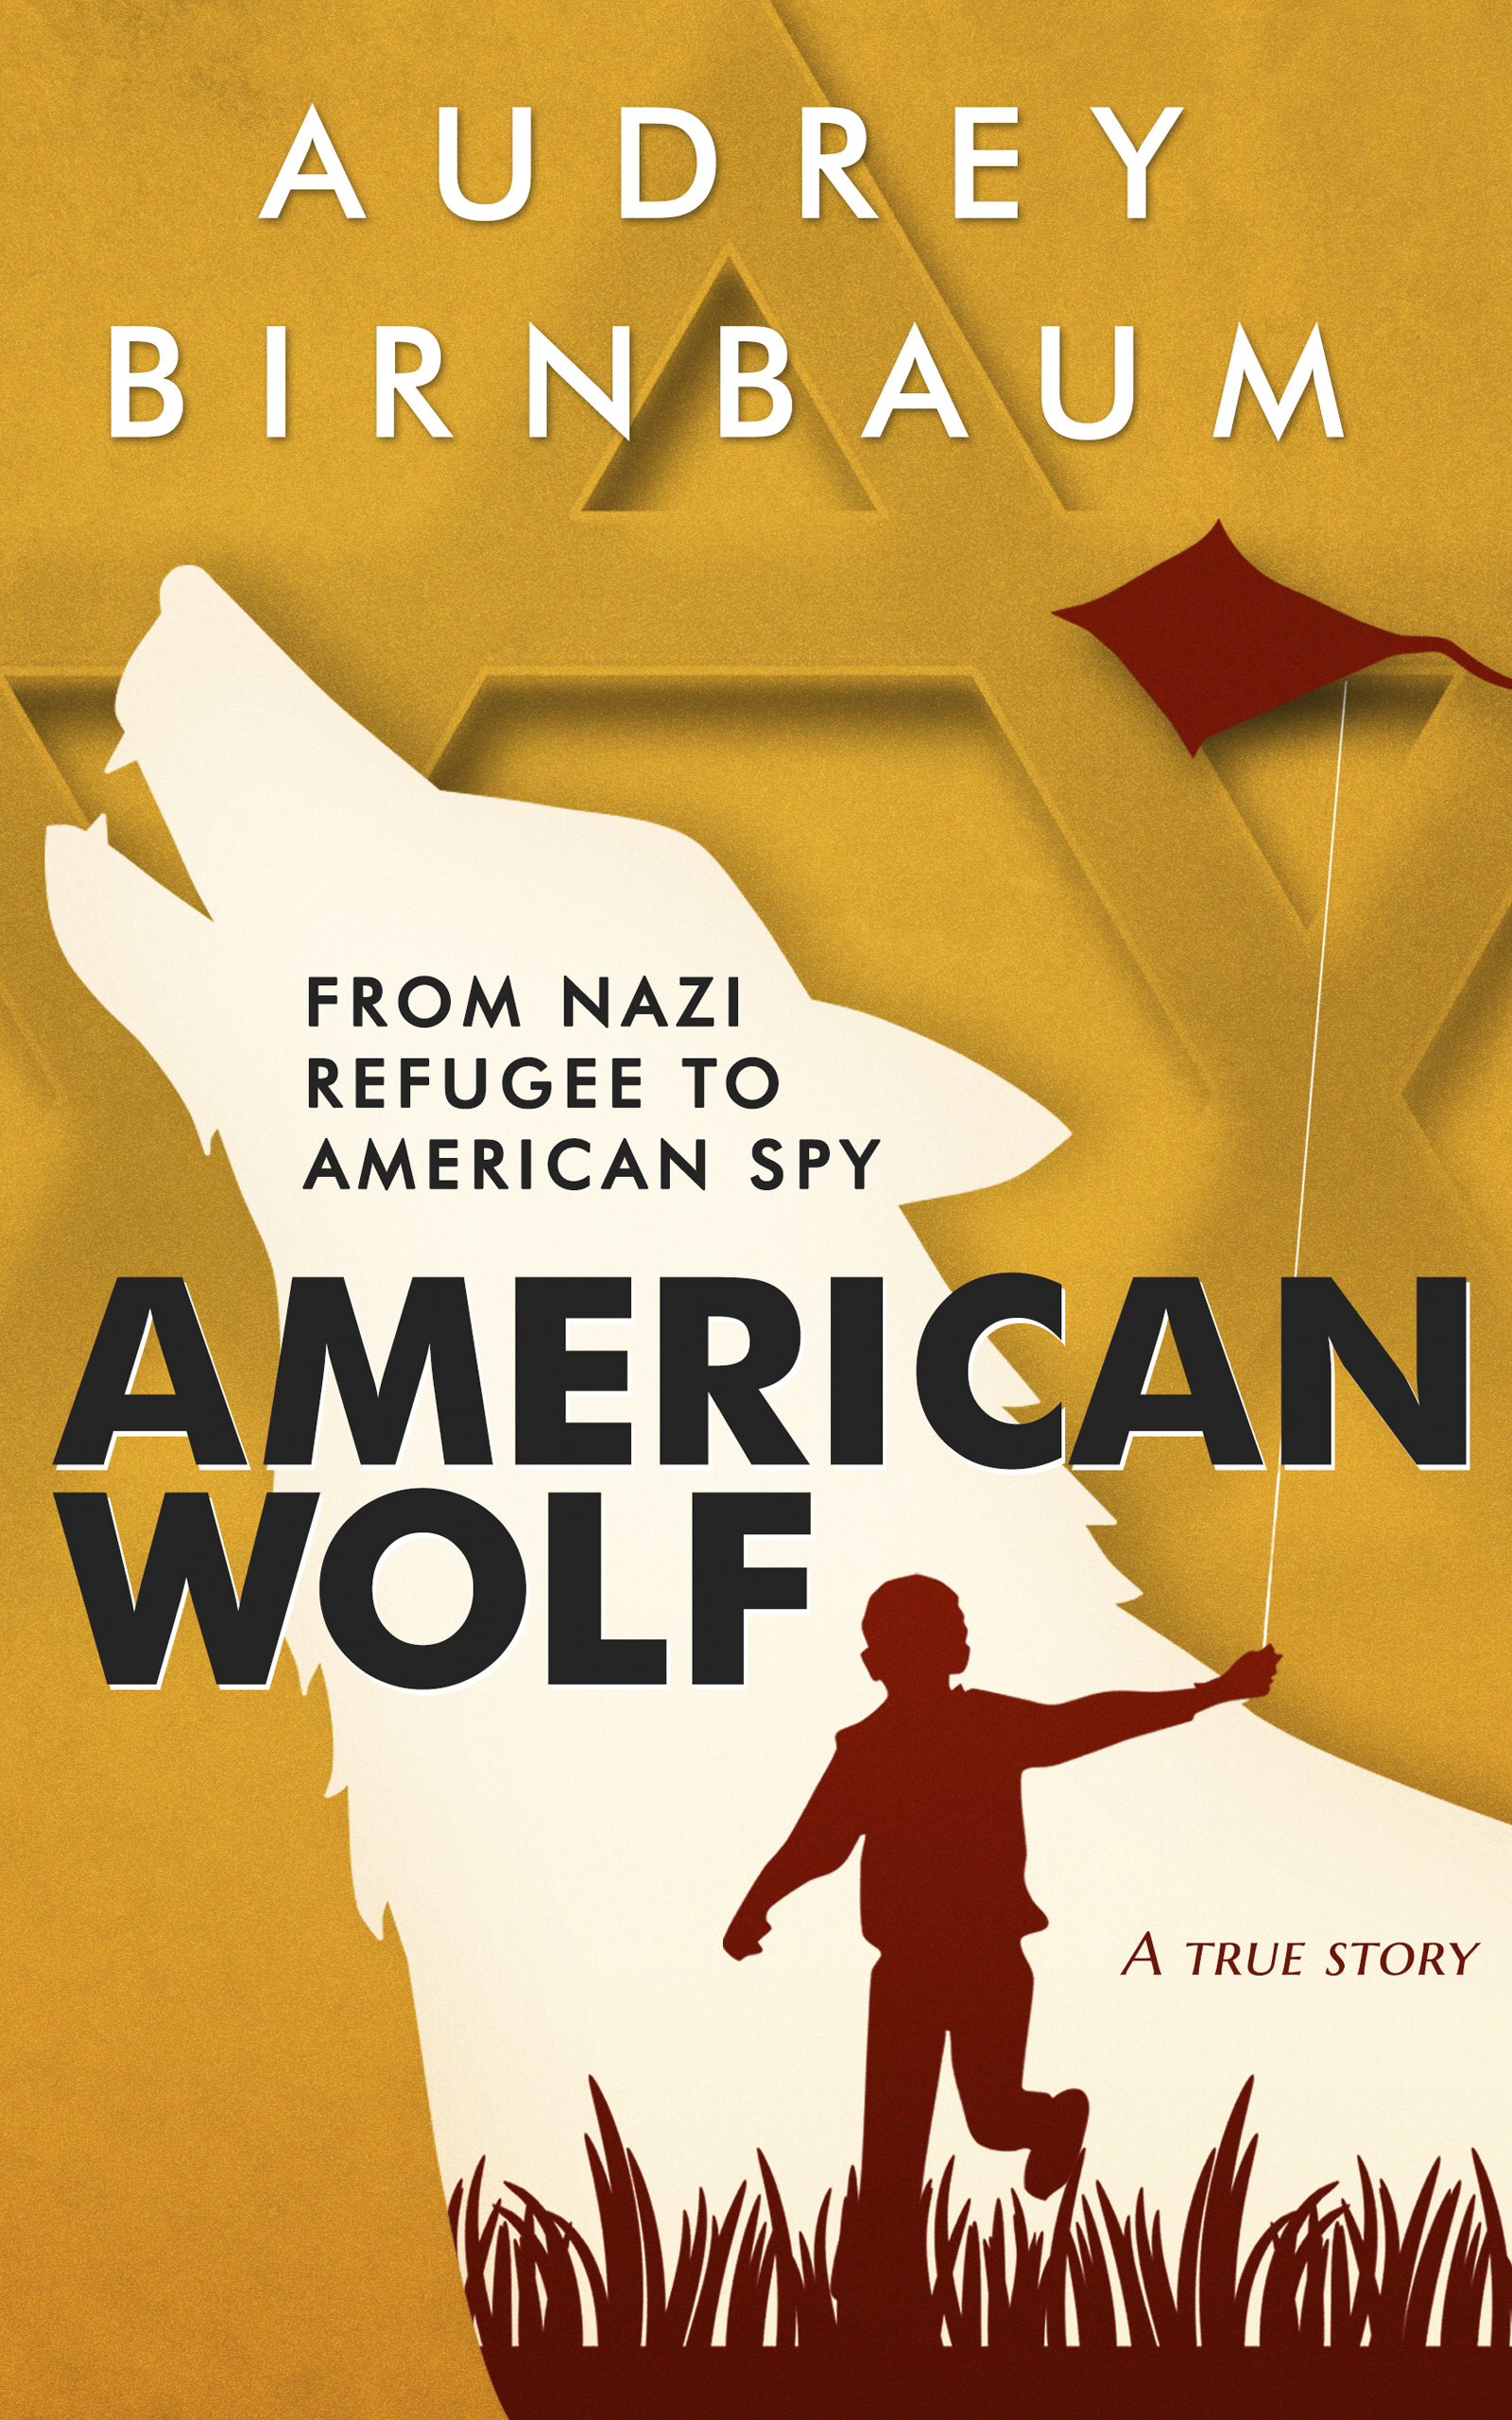 American Wolf. From Nazi Refugee to American Spy. A true Story, by Audrey Birnbaum